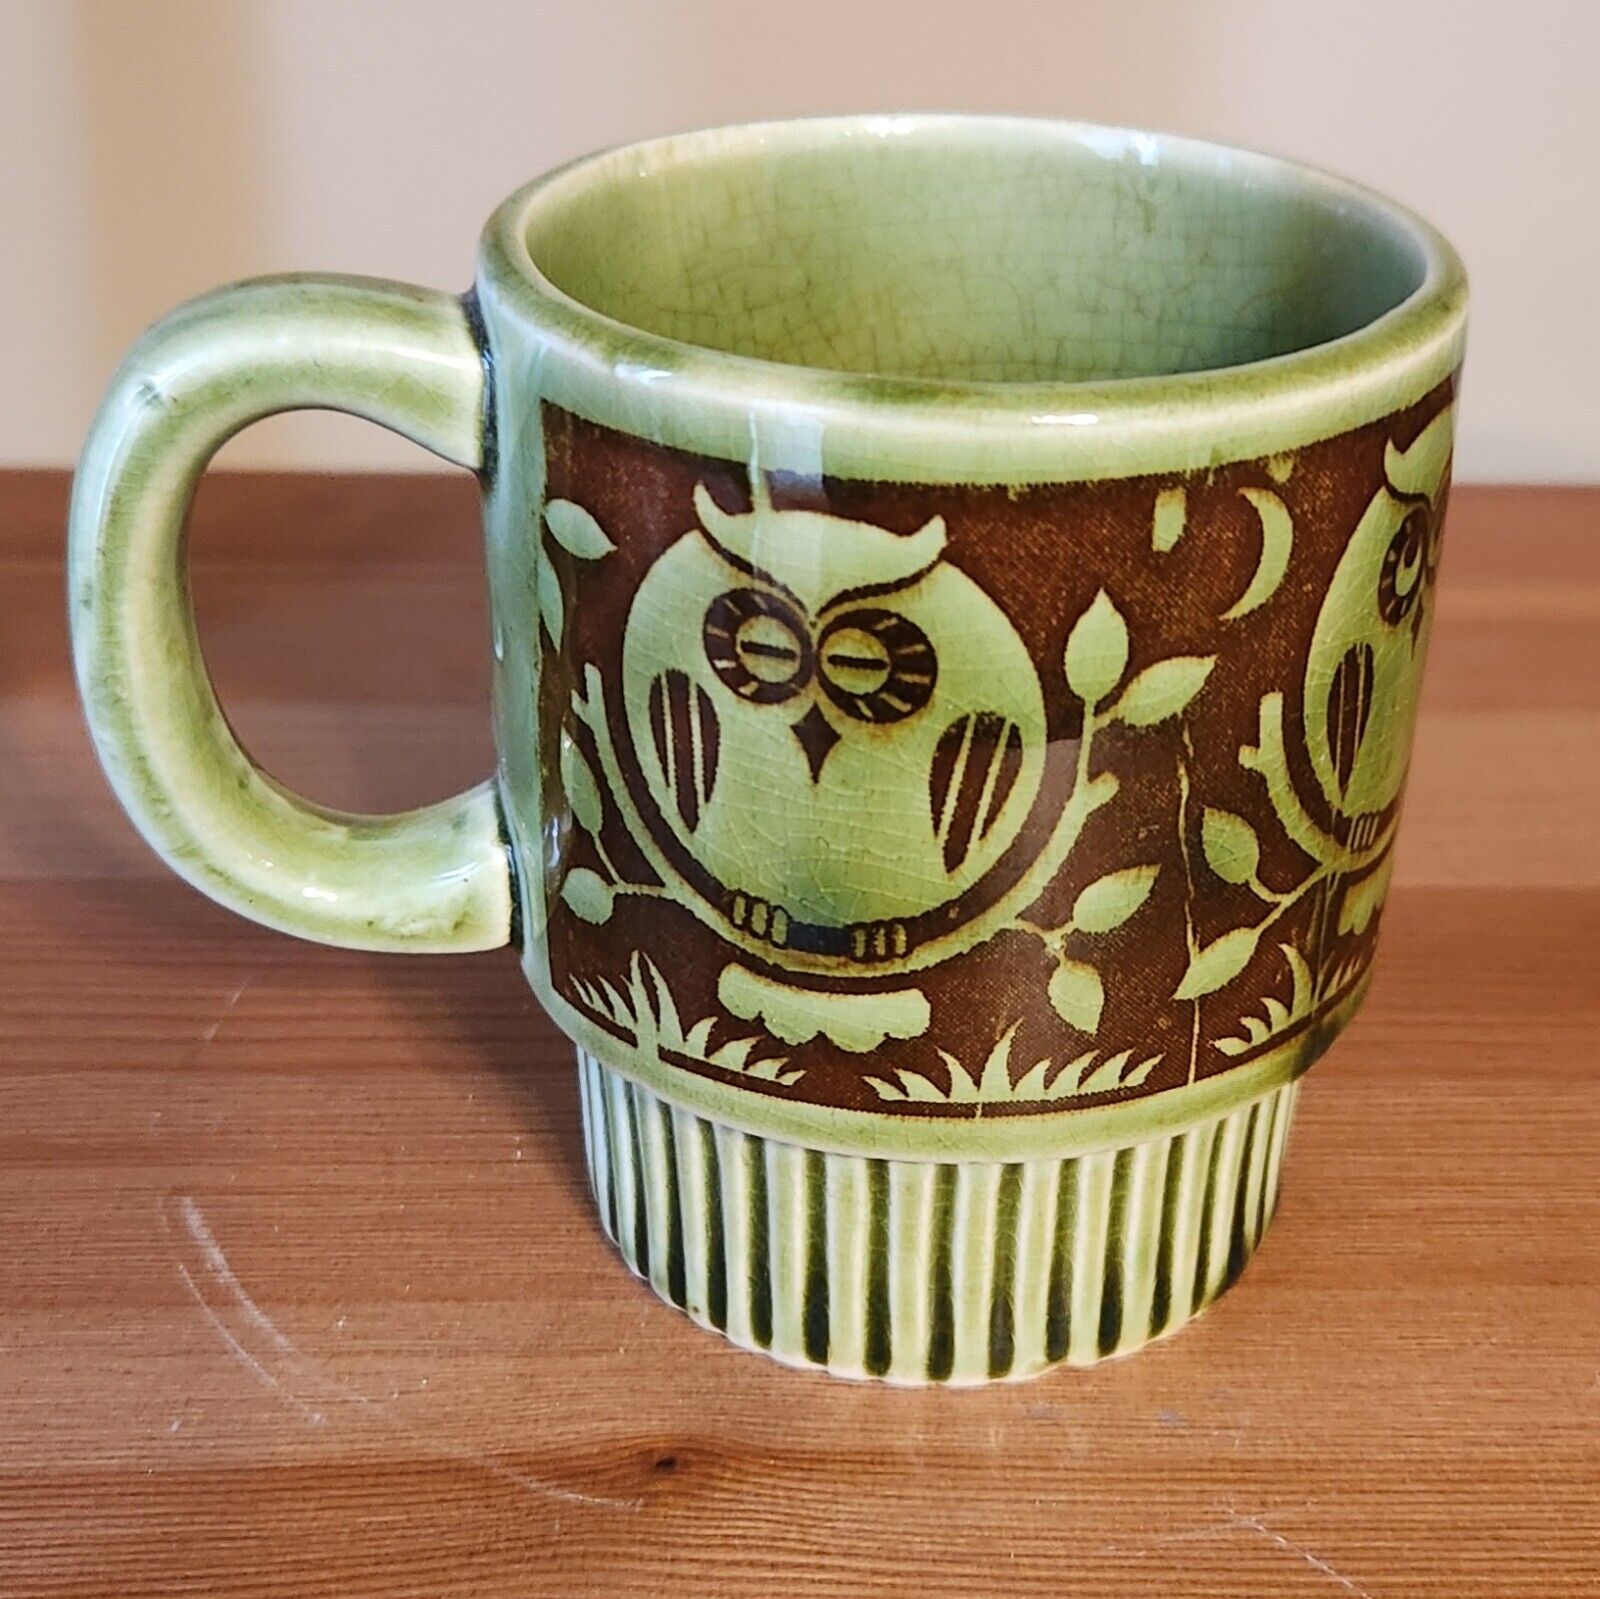 Vintage Japan Marked Olive Green & Brown Perched Owls on Branches Retro Ceramic